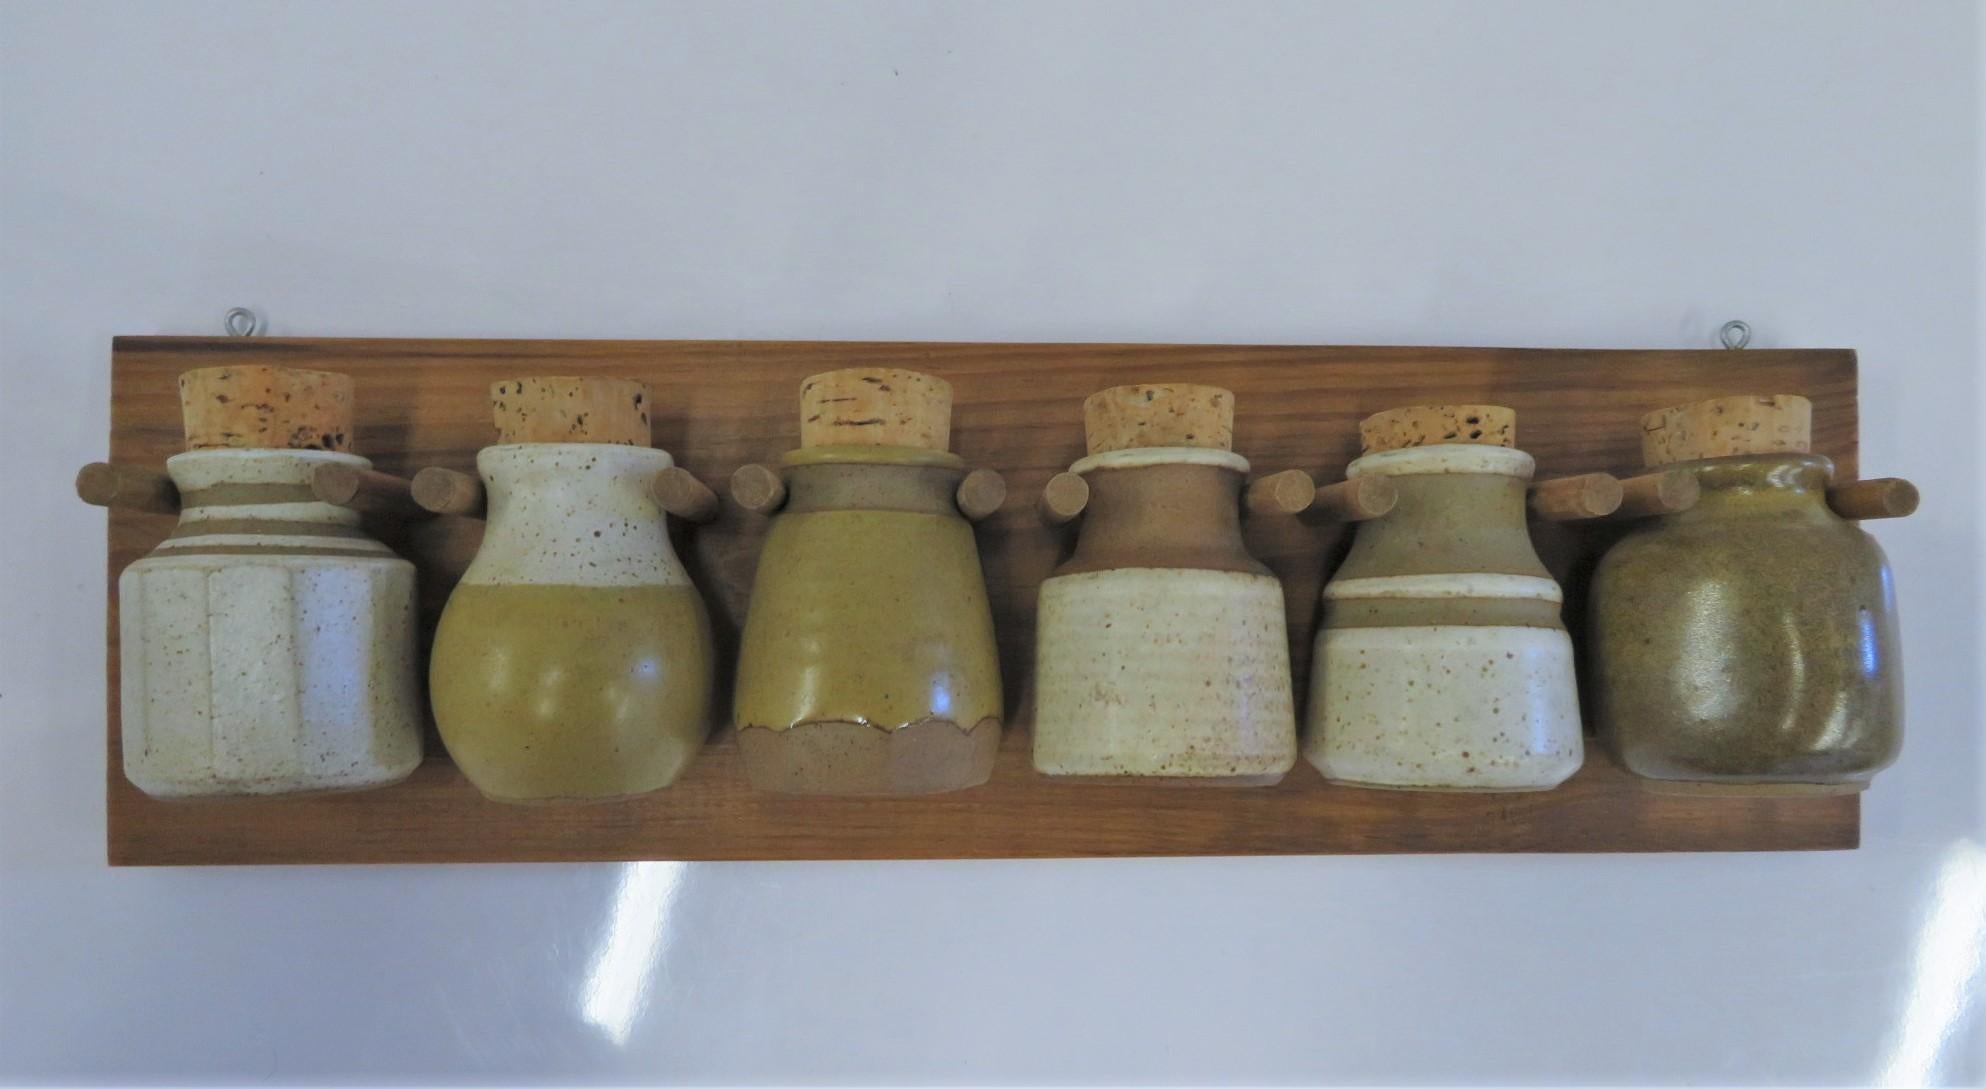 1970s Organic Modern Kitchen Wall Spice Rack with Pottery Jars Cork Tops 8